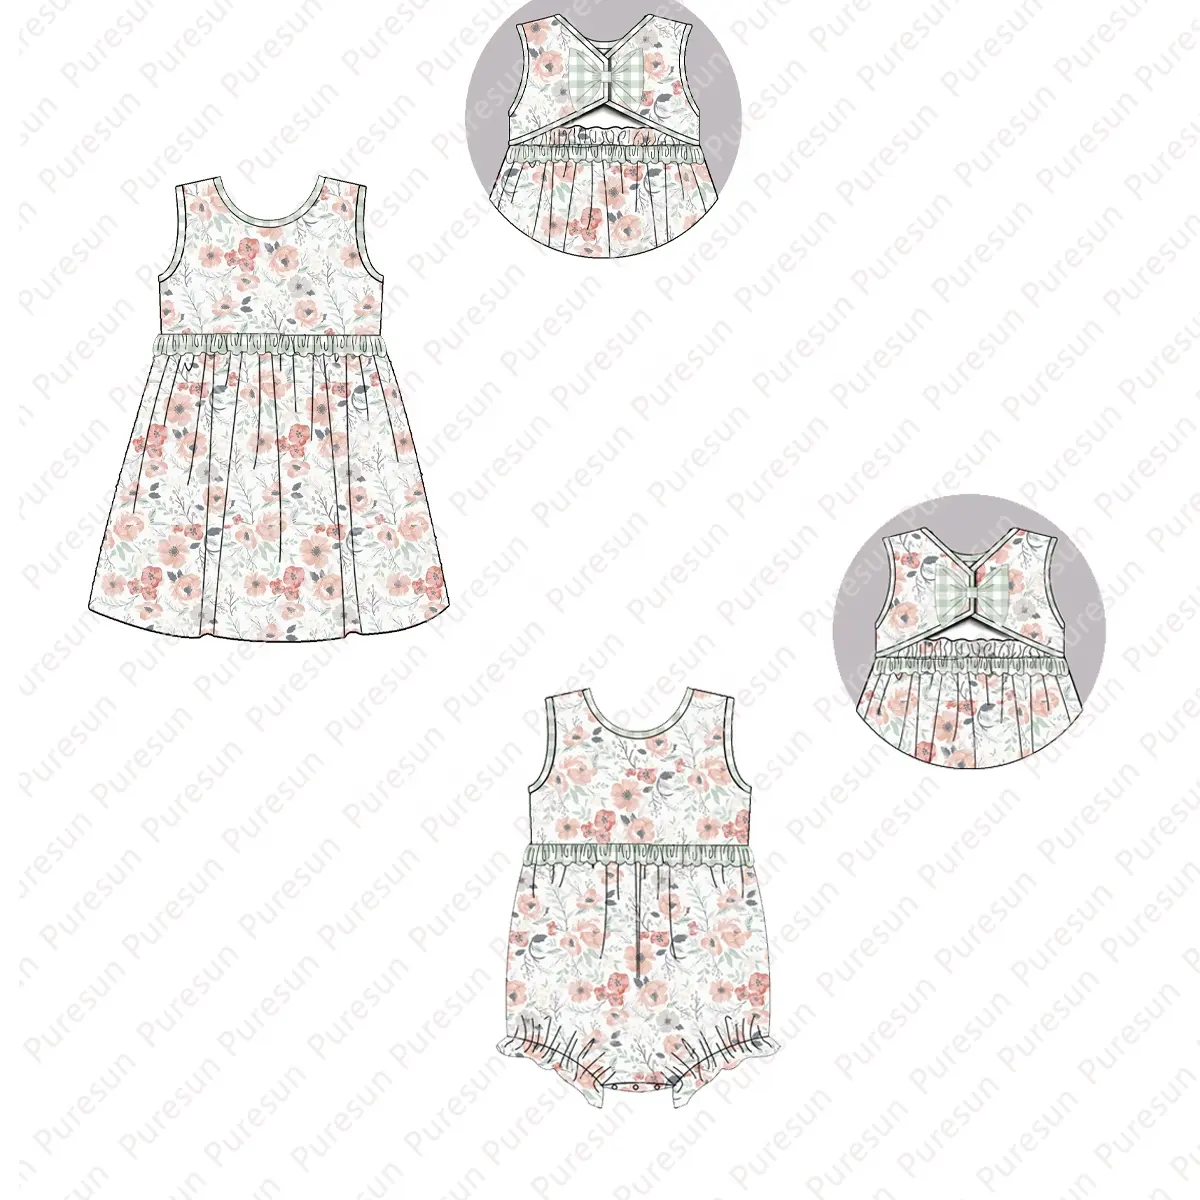 New Fashion Design Girls Customized Floral Suits Boutique Summer Dresses Clothing Toddler Kids Sibling Clothes